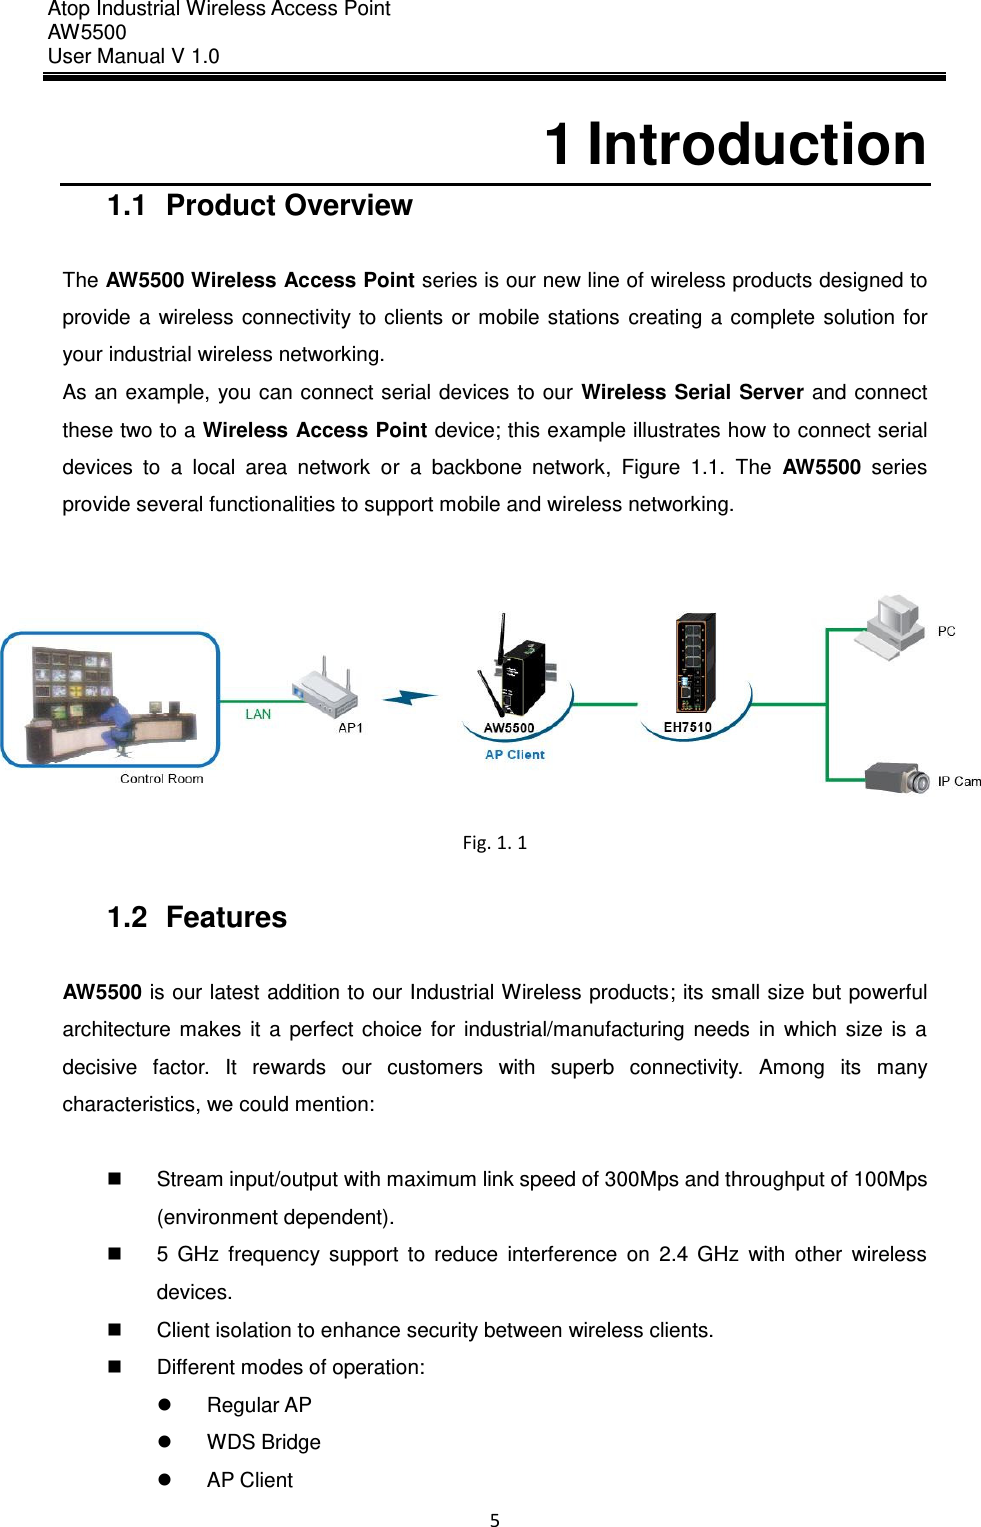 Atop Industrial Wireless Access Point AW 5500 User Manual V 1.0                      5  1 Introduction 1.1  Product Overview  The AW5500 Wireless Access Point series is our new line of wireless products designed to provide  a  wireless  connectivity to  clients  or  mobile stations  creating  a  complete  solution for your industrial wireless networking.   As an example,  you can connect serial devices to our  Wireless Serial  Server and connect these two to a Wireless Access Point device; this example illustrates how to connect serial devices  to  a  local  area  network  or  a  backbone  network,  Figure  1.1.  The  AW5500  series provide several functionalities to support mobile and wireless networking.   Fig. 1. 1  1.2  Features  AW5500 is our latest addition to our Industrial Wireless products; its small size but powerful architecture  makes  it  a  perfect  choice  for  industrial/manufacturing  needs  in  which  size  is  a decisive  factor.  It  rewards  our  customers  with  superb  connectivity.  Among  its  many characteristics, we could mention:    Stream input/output with maximum link speed of 300Mps and throughput of 100Mps (environment dependent).   5  GHz  frequency  support  to  reduce  interference  on  2.4  GHz  with  other  wireless devices.   Client isolation to enhance security between wireless clients.   Different modes of operation:     Regular AP   WDS Bridge   AP Client 